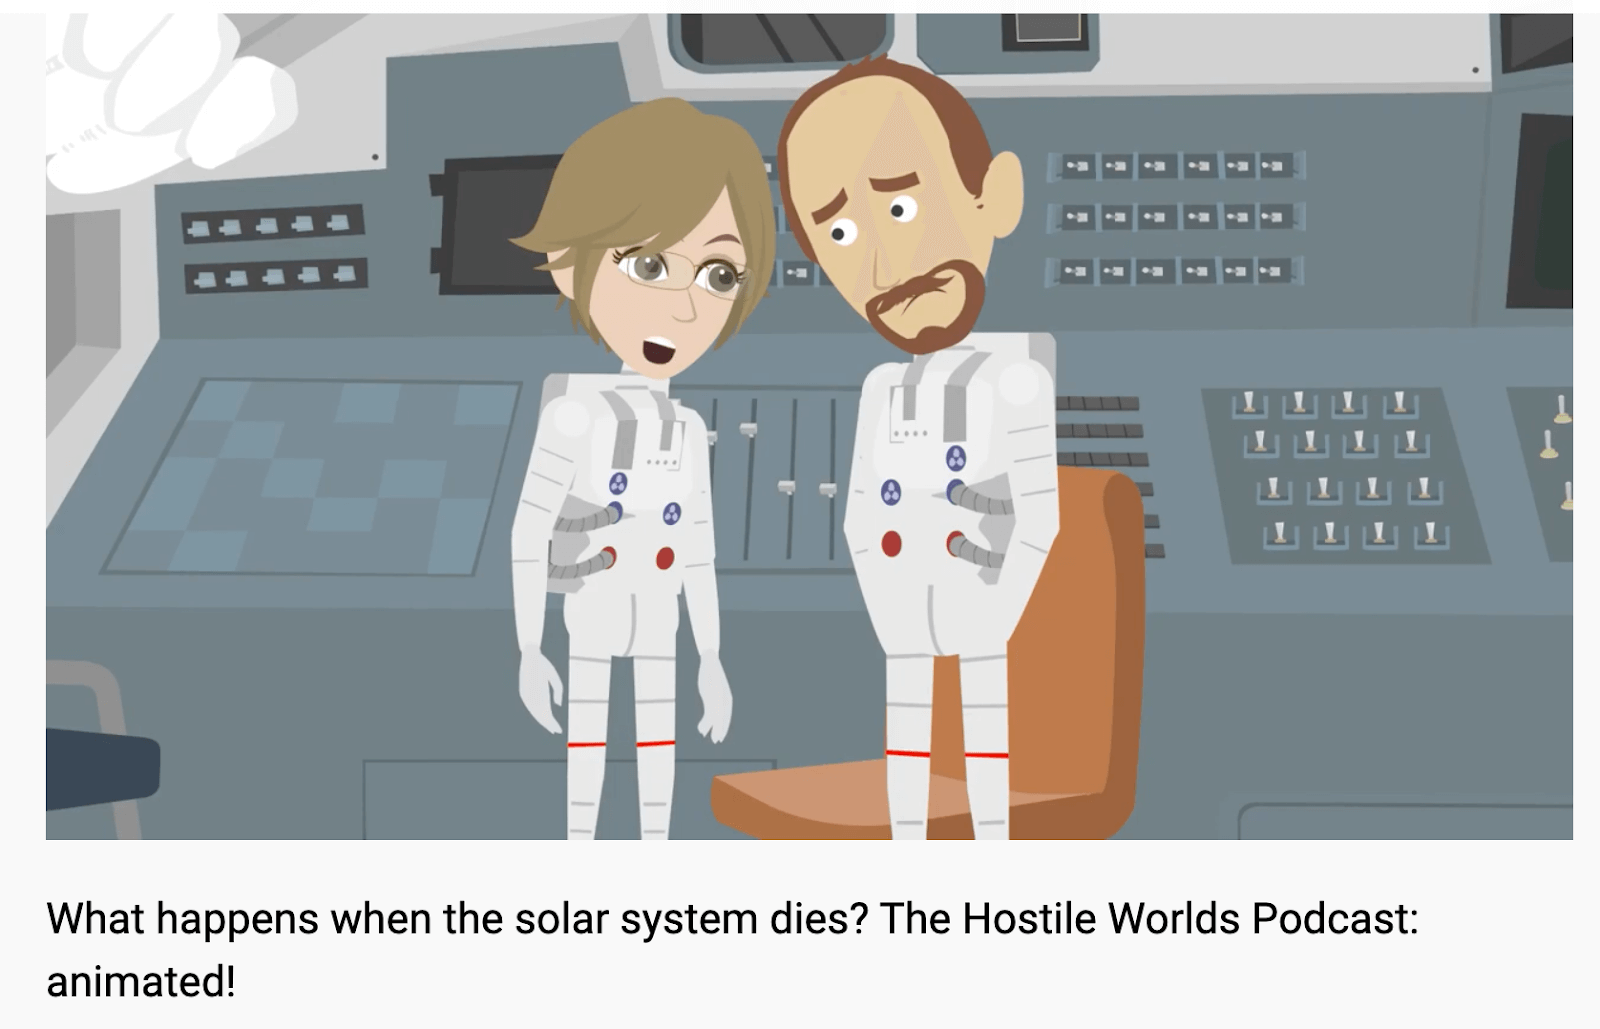 Hostile worlds how to start a video podcast